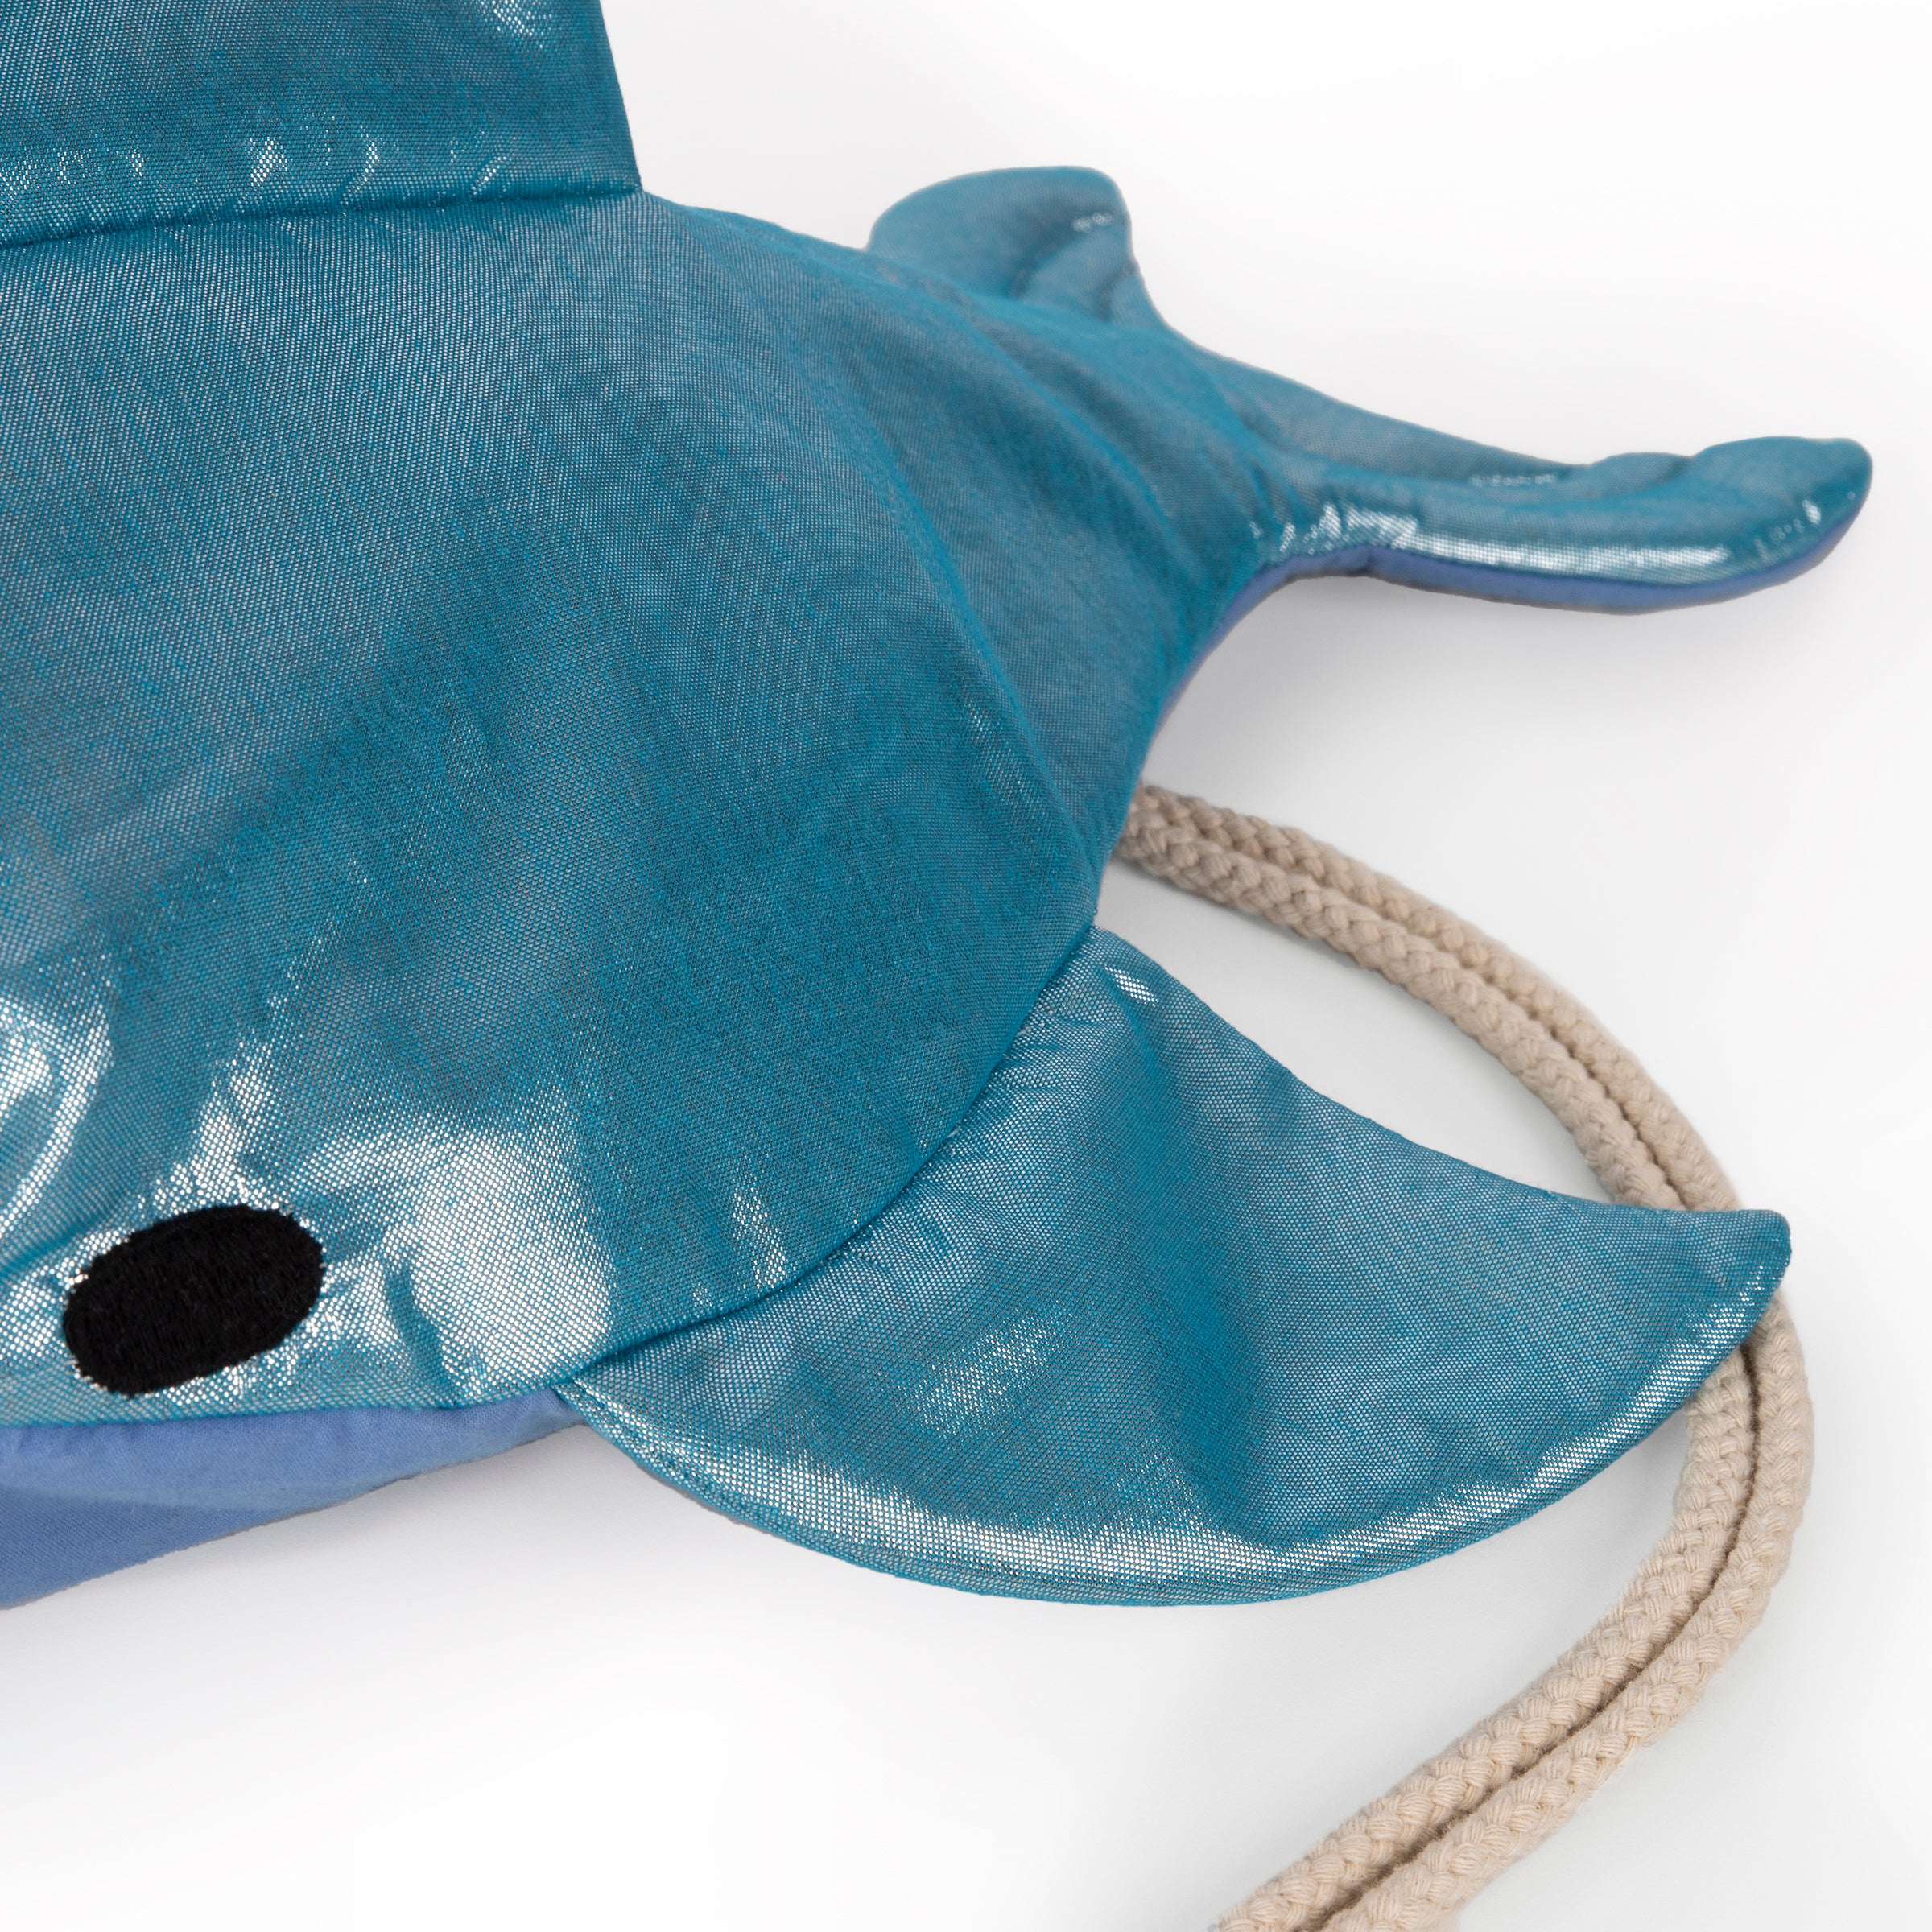 This shiny shark is  a backpack crafted from blue lamé fabric with a cotton lining and cord straps.